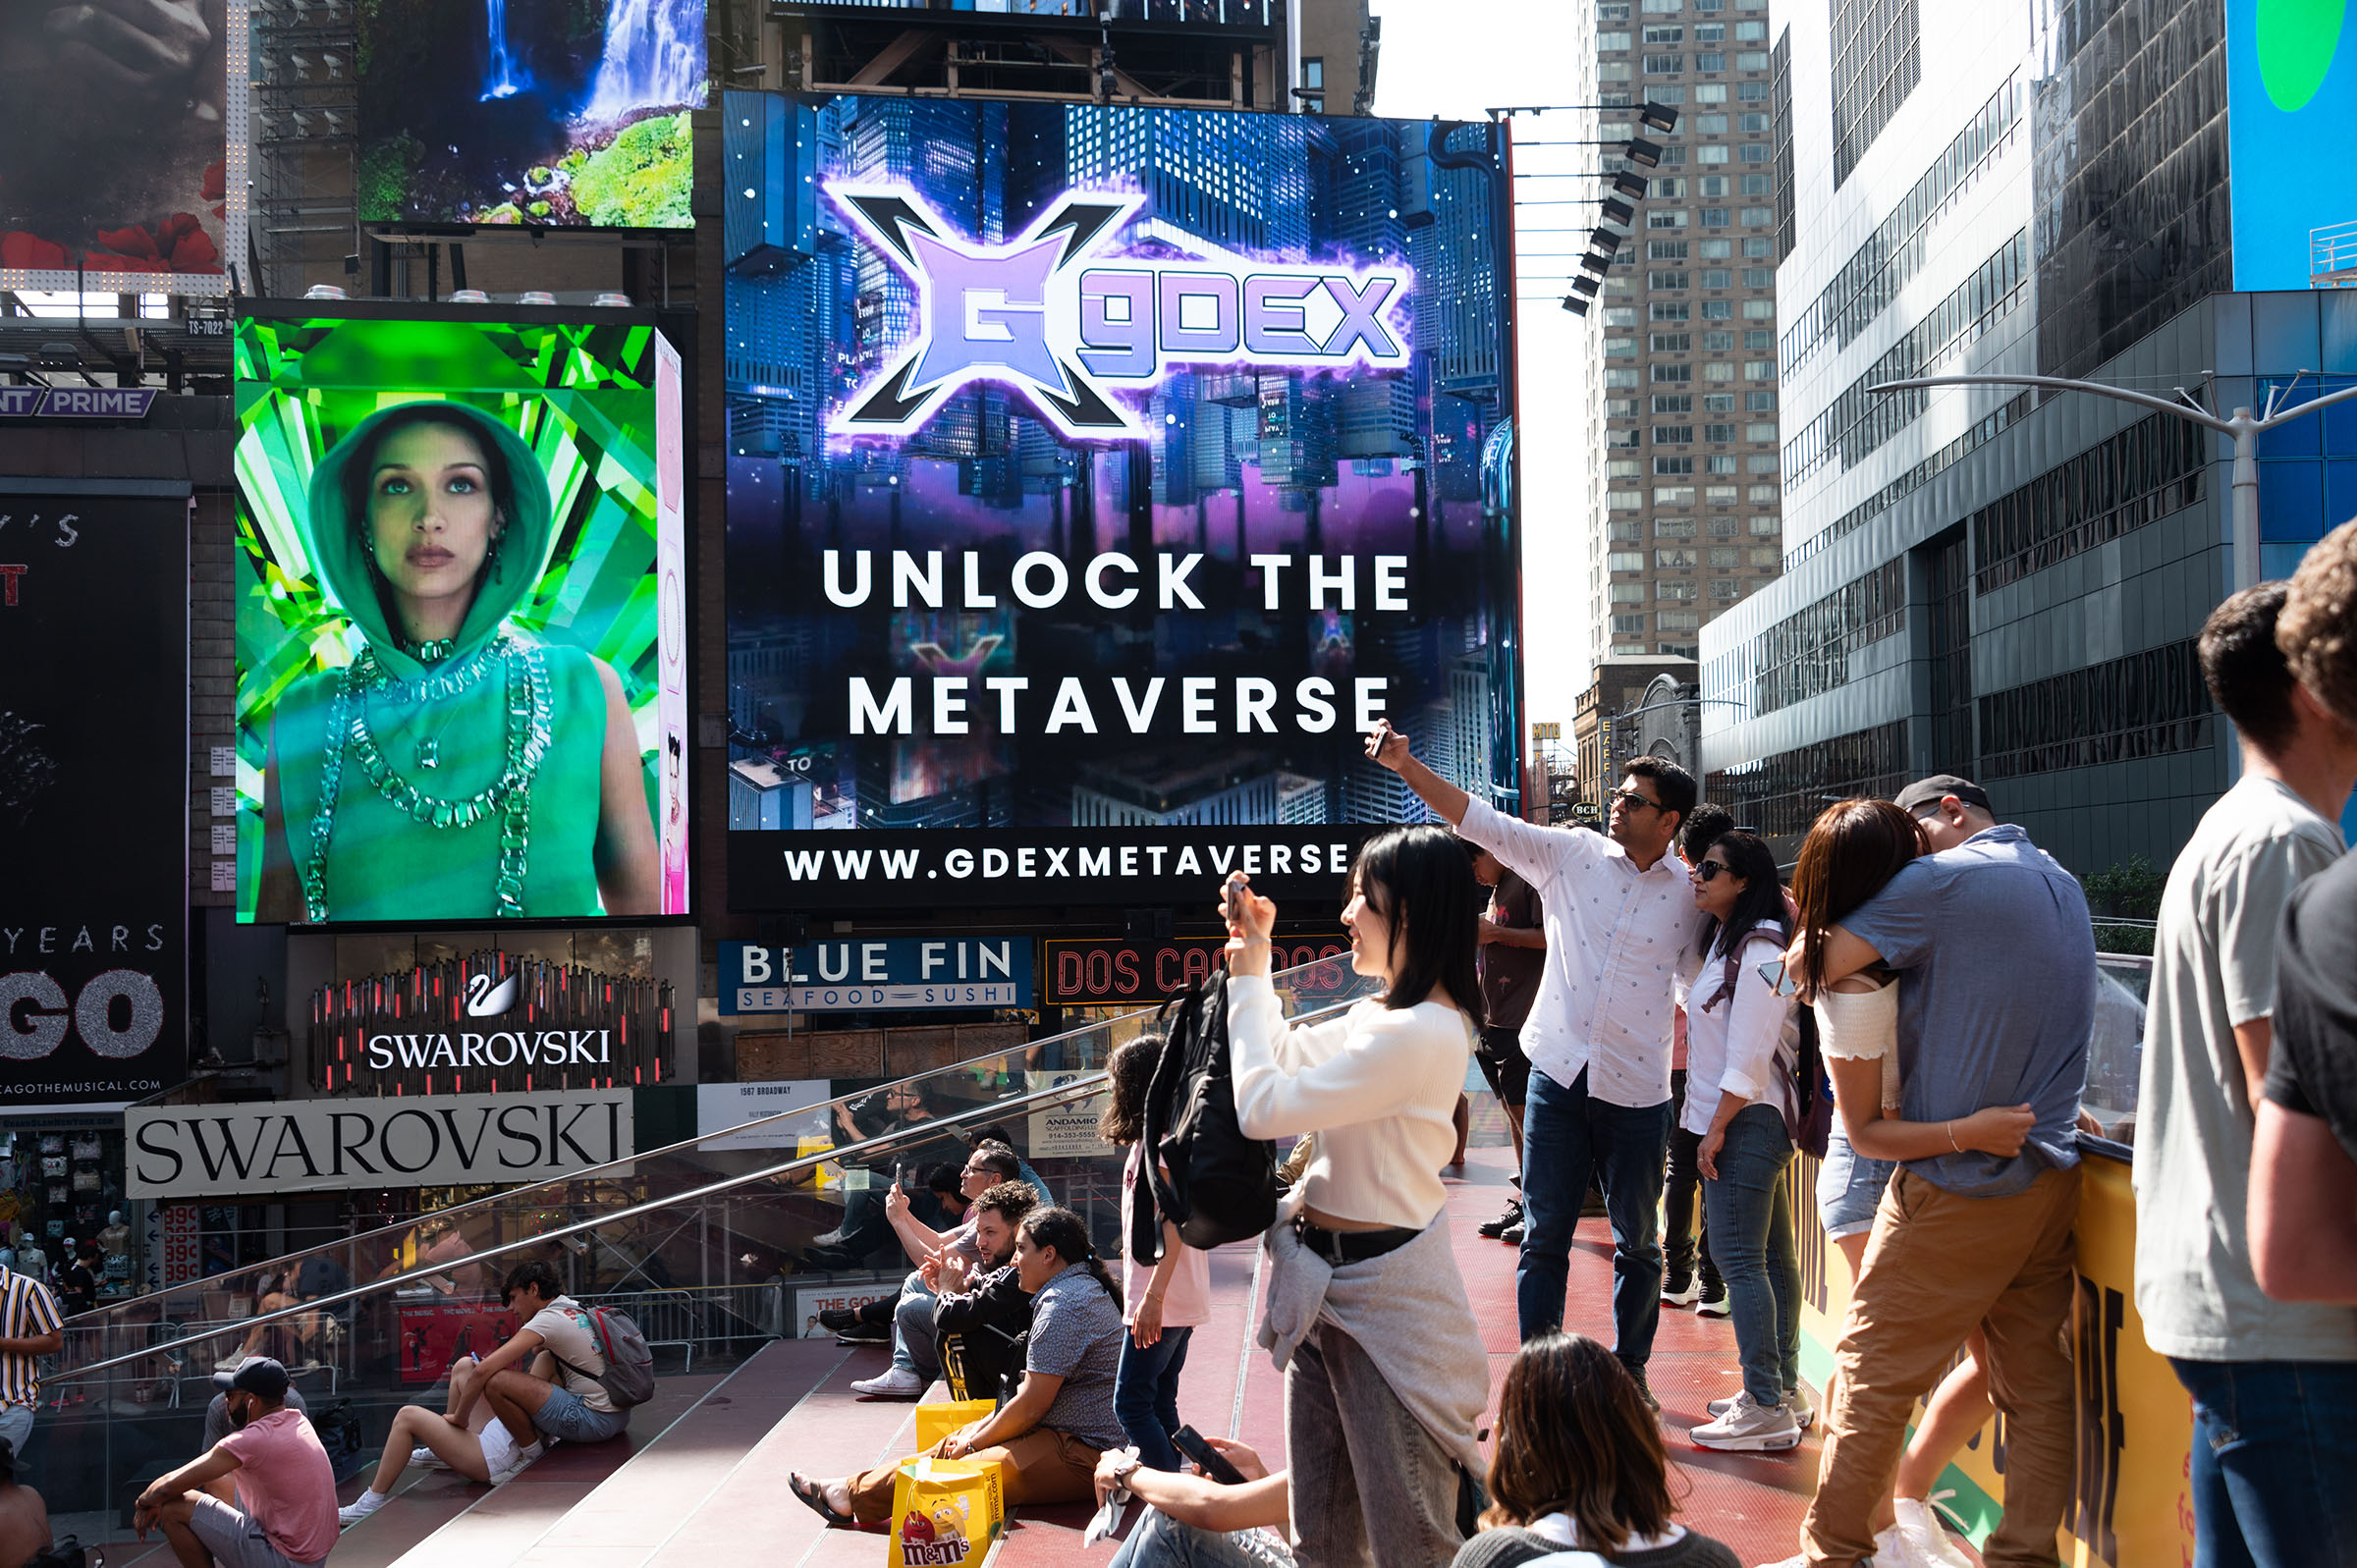 A billboard reads "unlock the metaverse" in Times Square during the 4th annual NFT.NYC conference on June 20, 2022 in New York City. (Noam Galai—Getty Images)